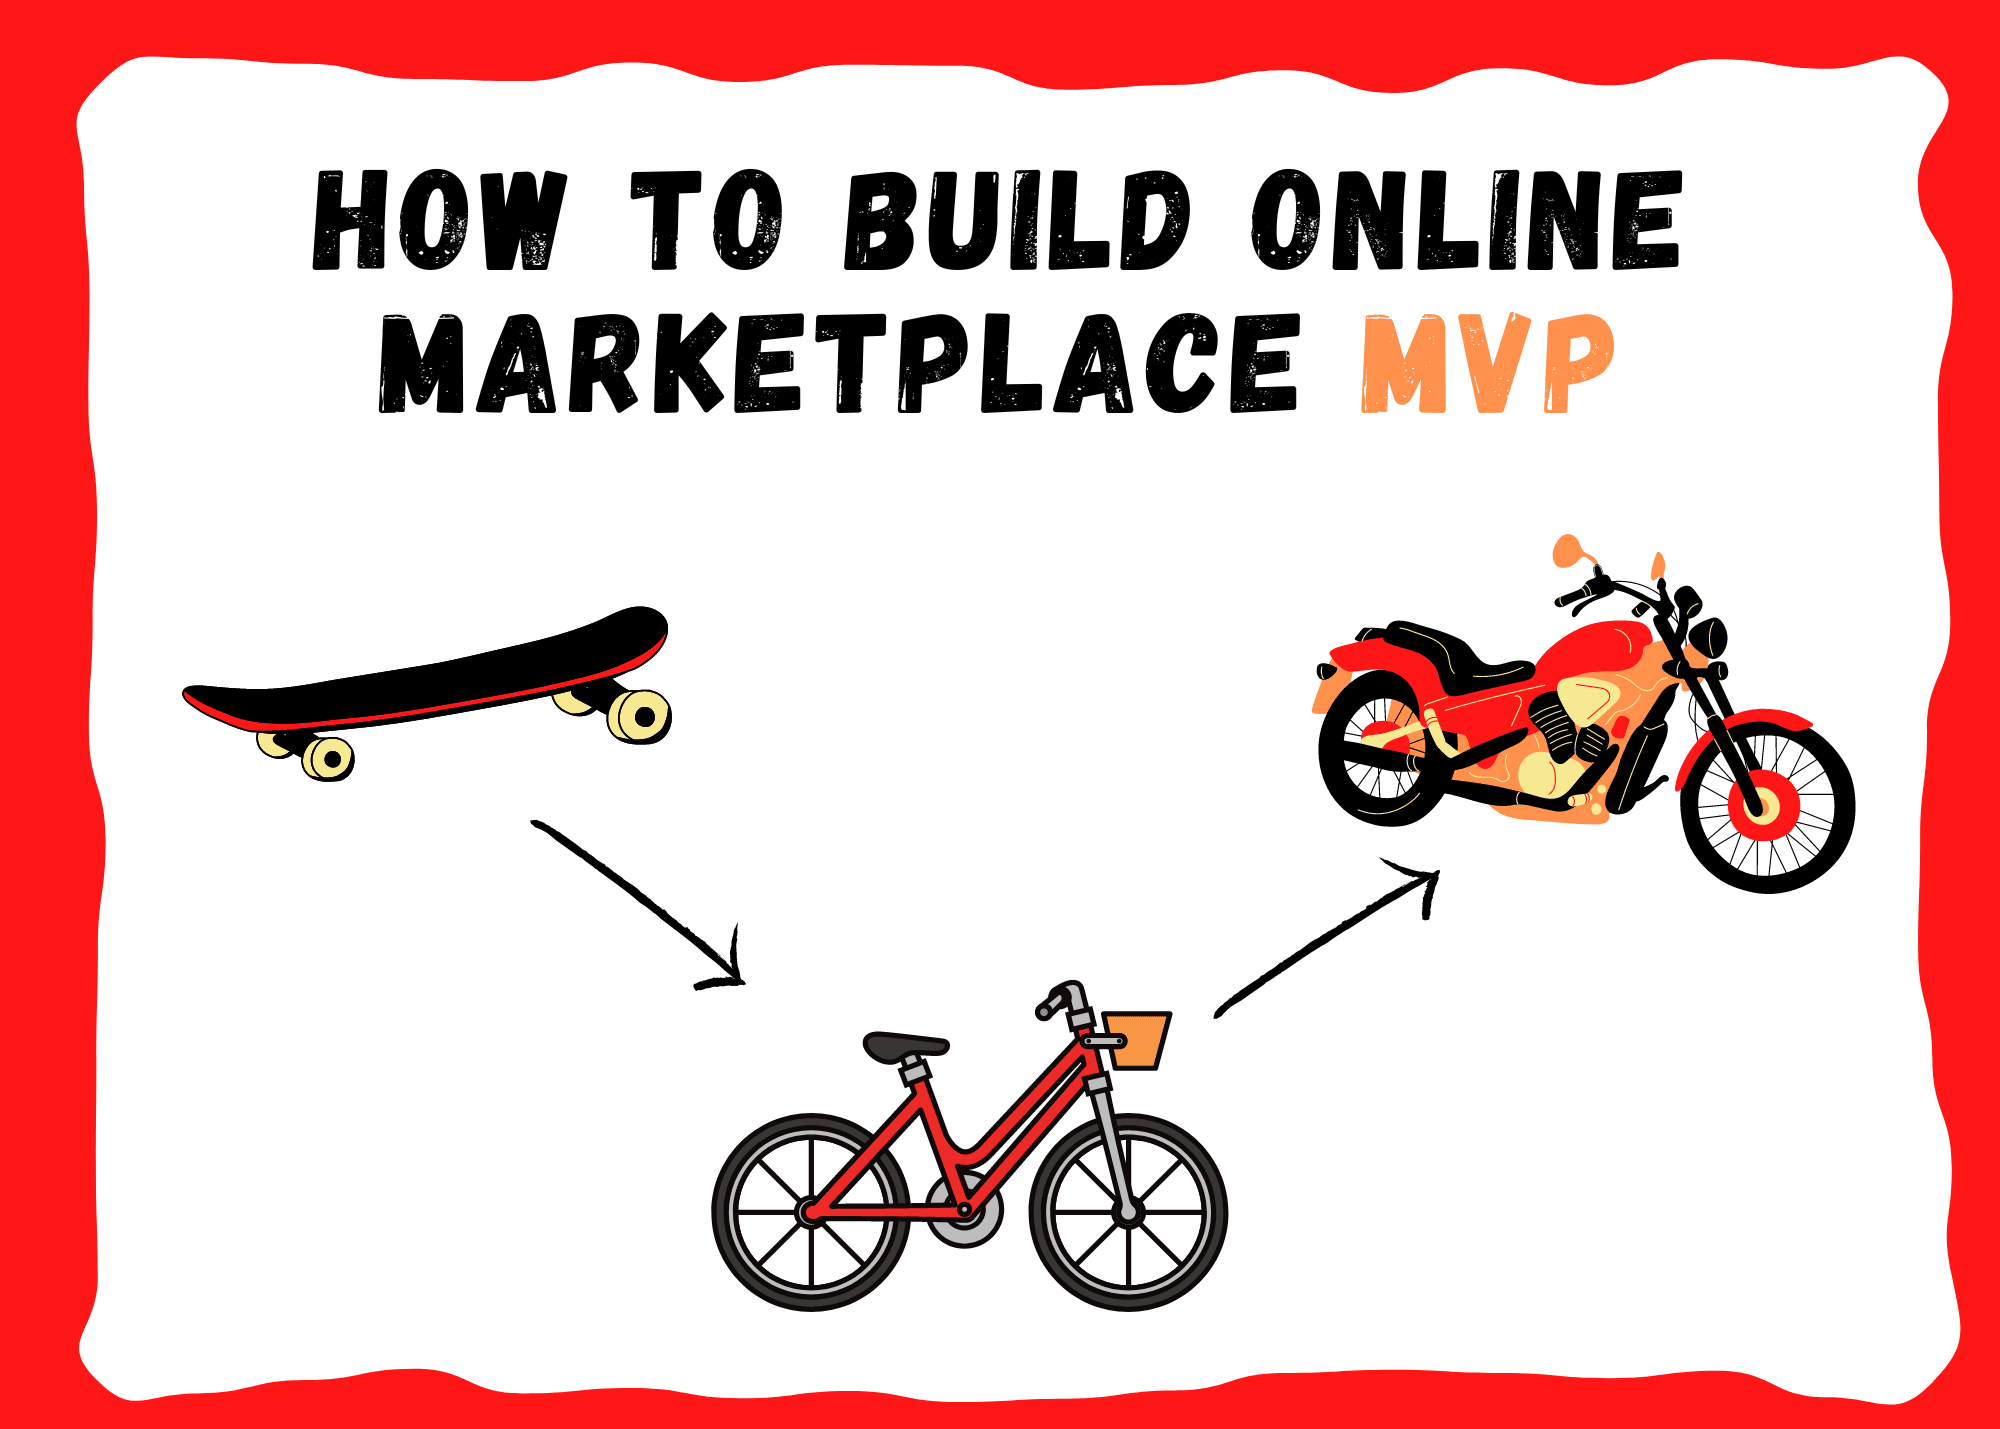 How to Build Online Marketplace MVP